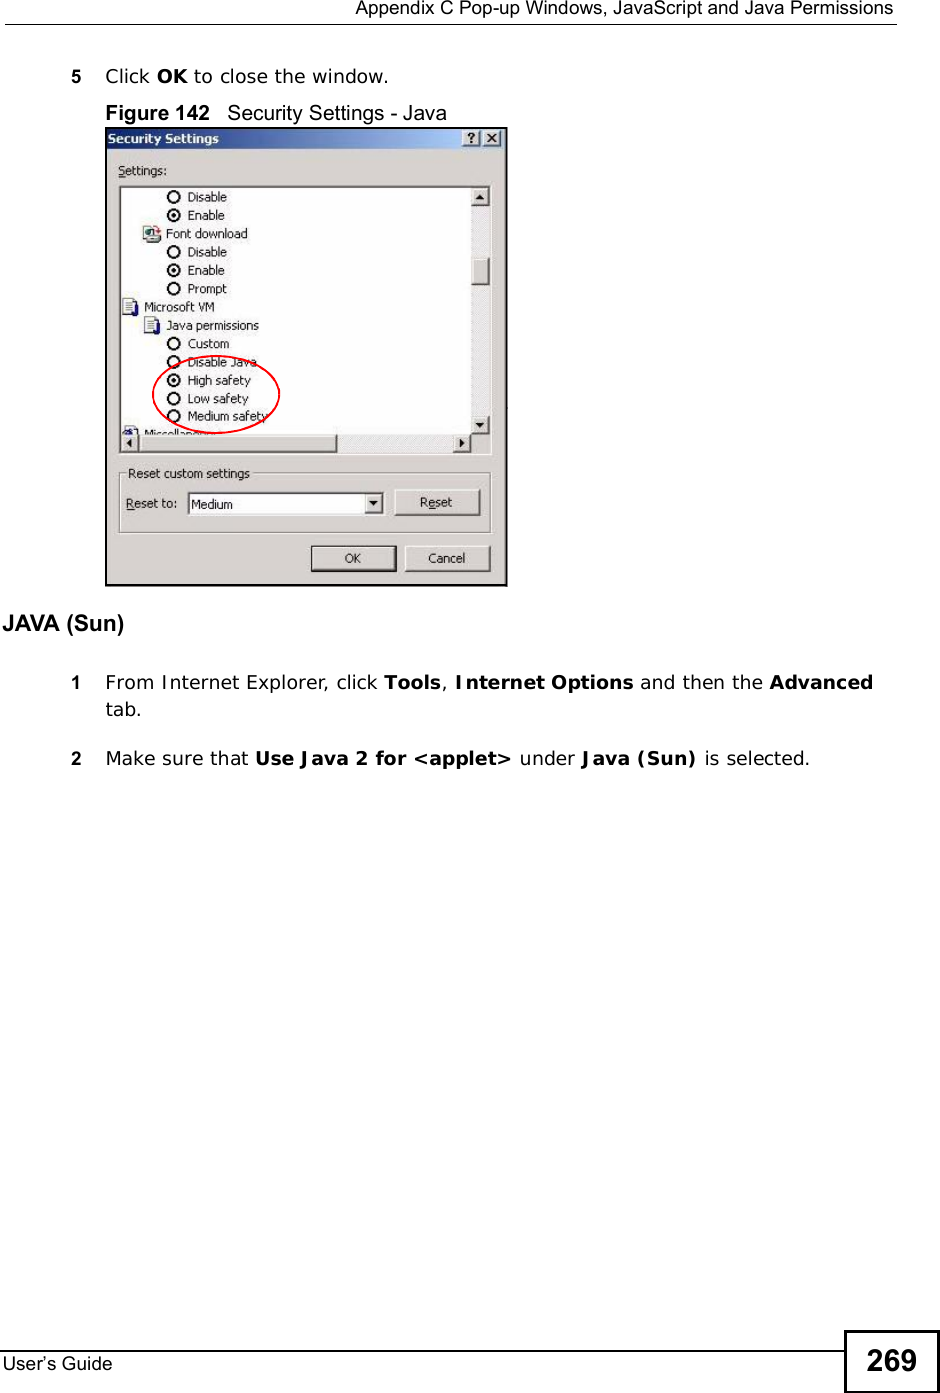  Appendix CPop-up Windows, JavaScript and Java PermissionsUser s Guide 2695Click OK to close the window.Figure 142   Security Settings - Java JAVA (Sun)1From Internet Explorer, click Tools,Internet Options and then the Advancedtab. 2Make sure that Use Java 2 for &lt;applet&gt; under Java (Sun) is selected.